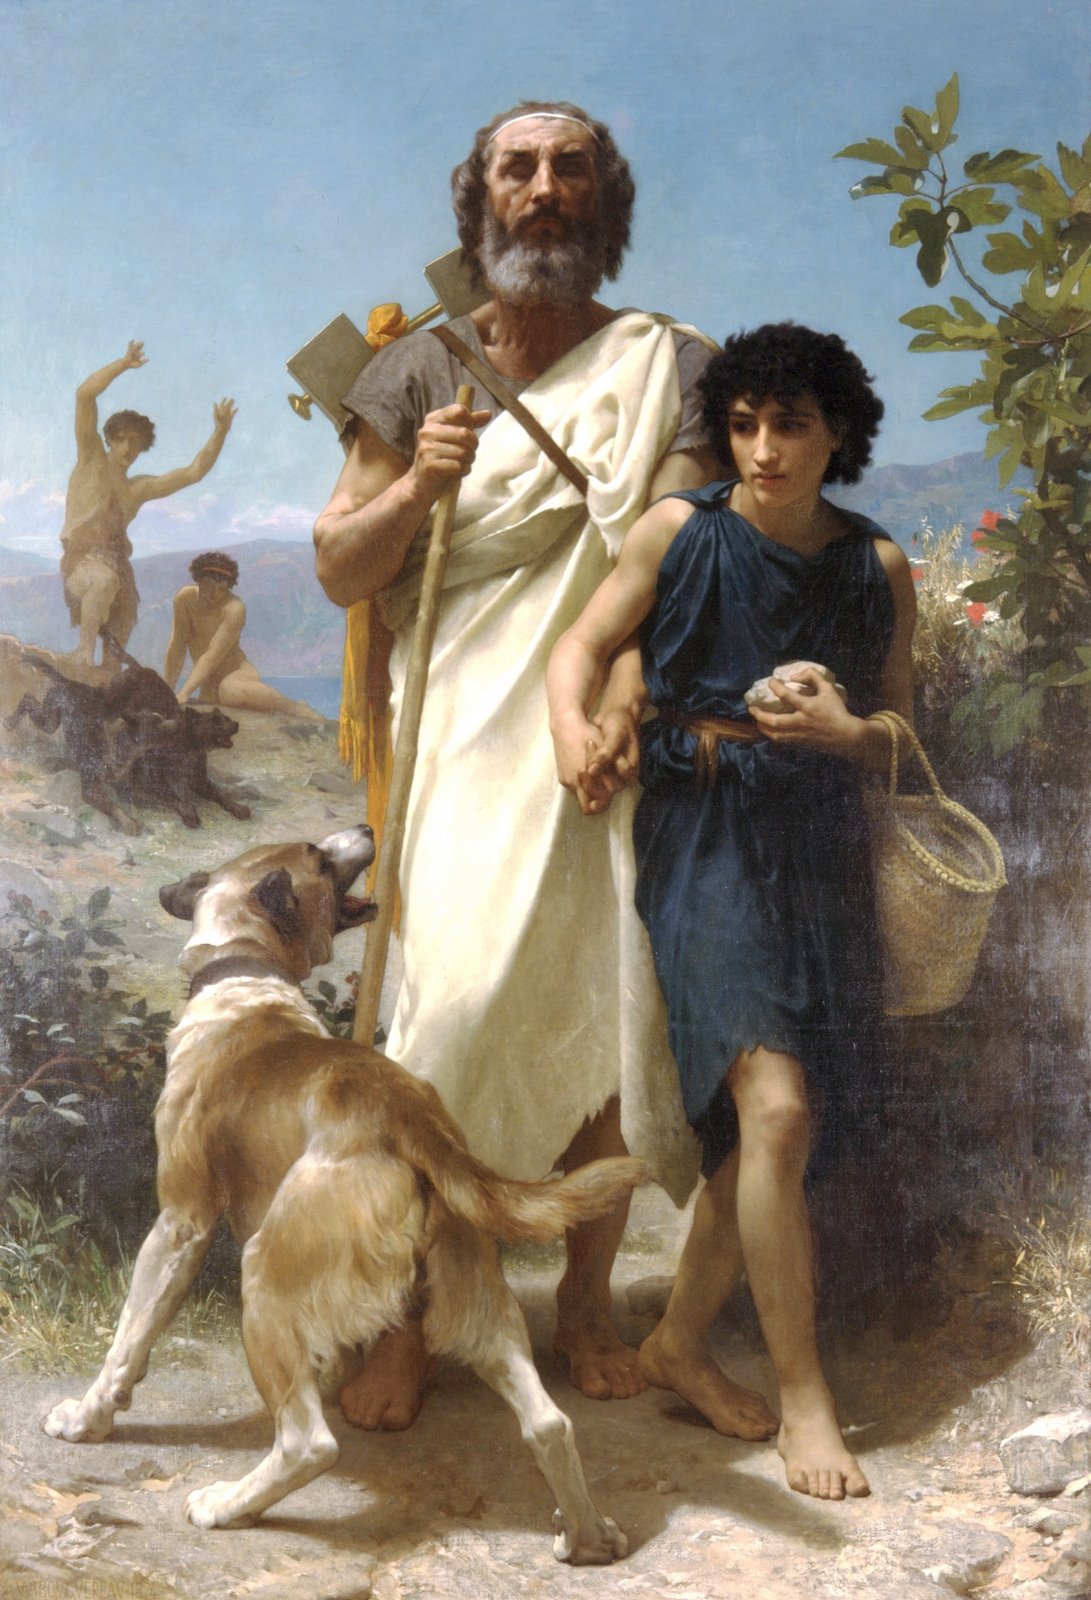 [William-Adolphe_Bouguereau_(1825-1905)_-_Homer_and_his_Guide_(1874).jpg]